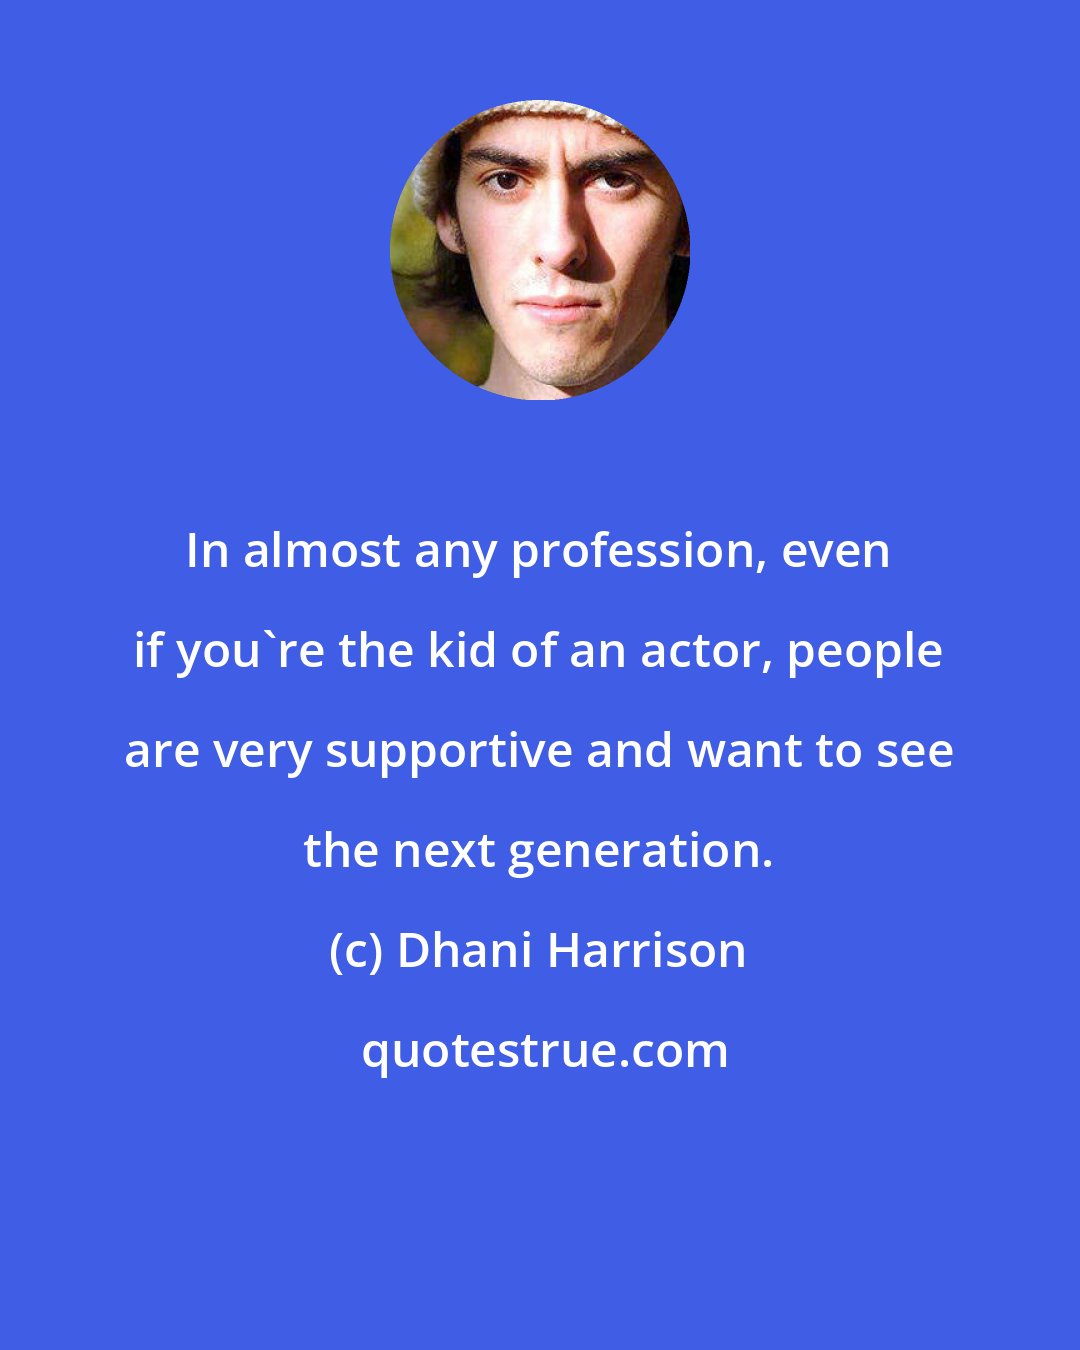 Dhani Harrison: In almost any profession, even if you're the kid of an actor, people are very supportive and want to see the next generation.